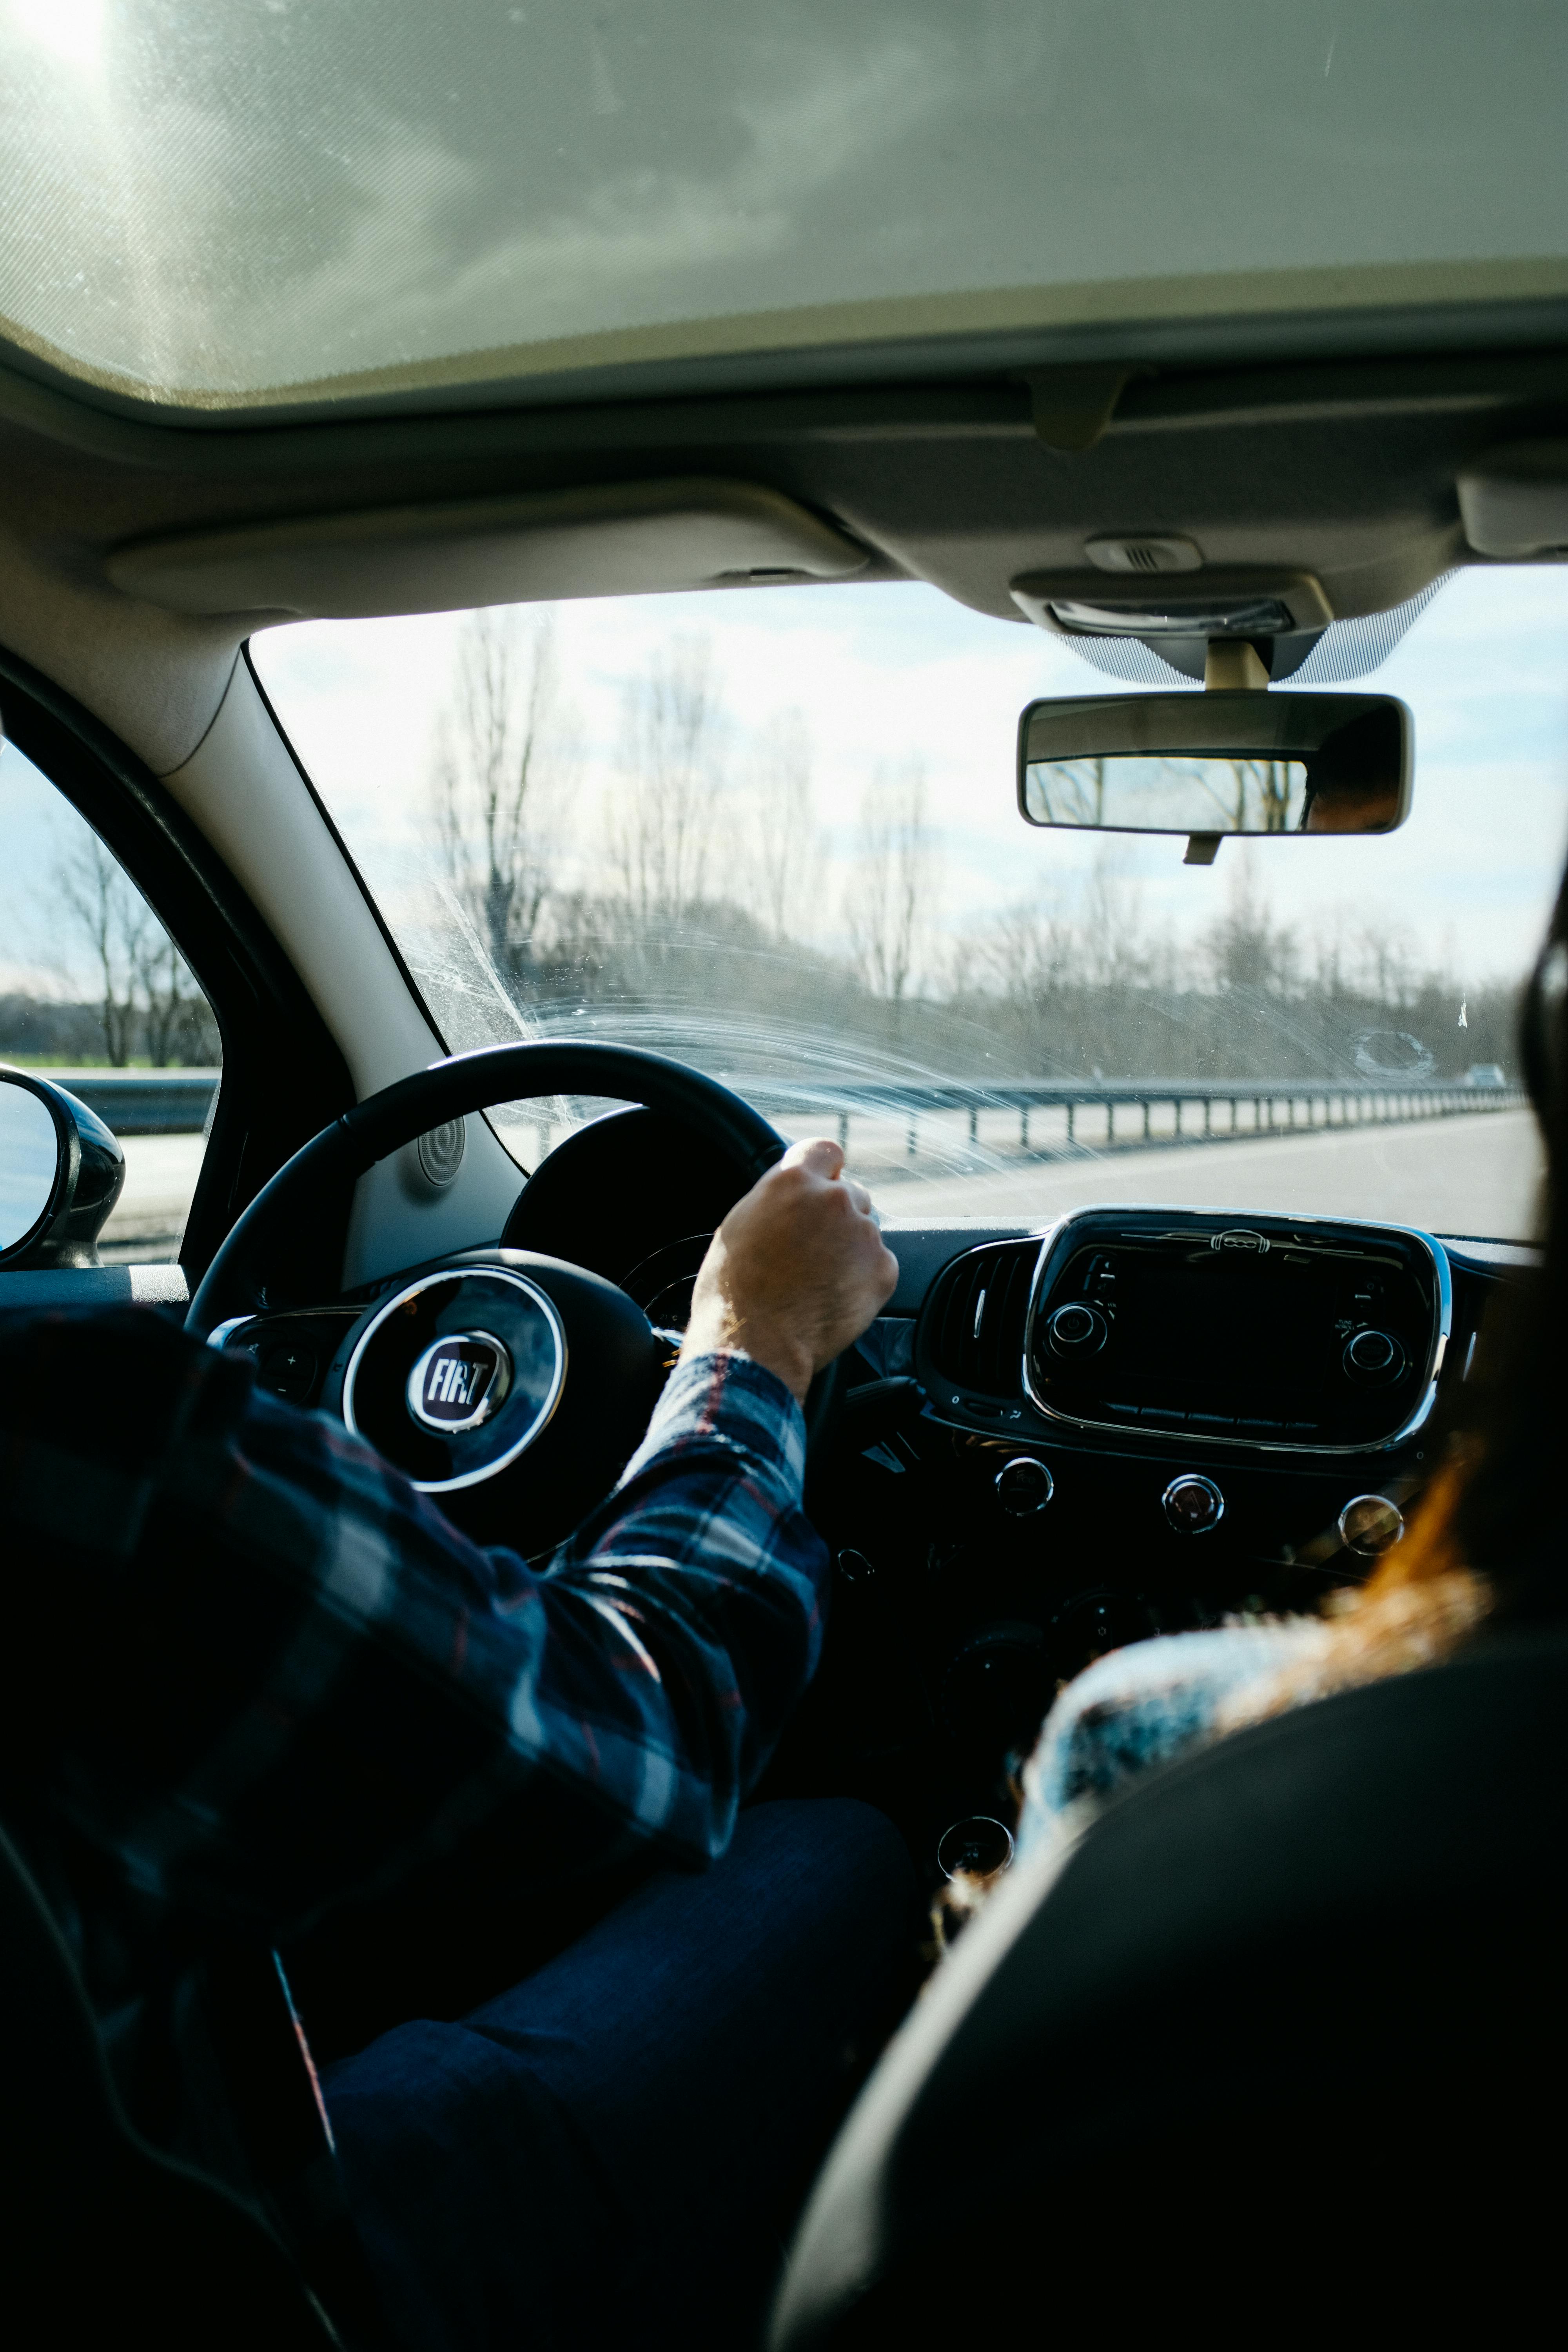 A couple driving together | Source: Pexels